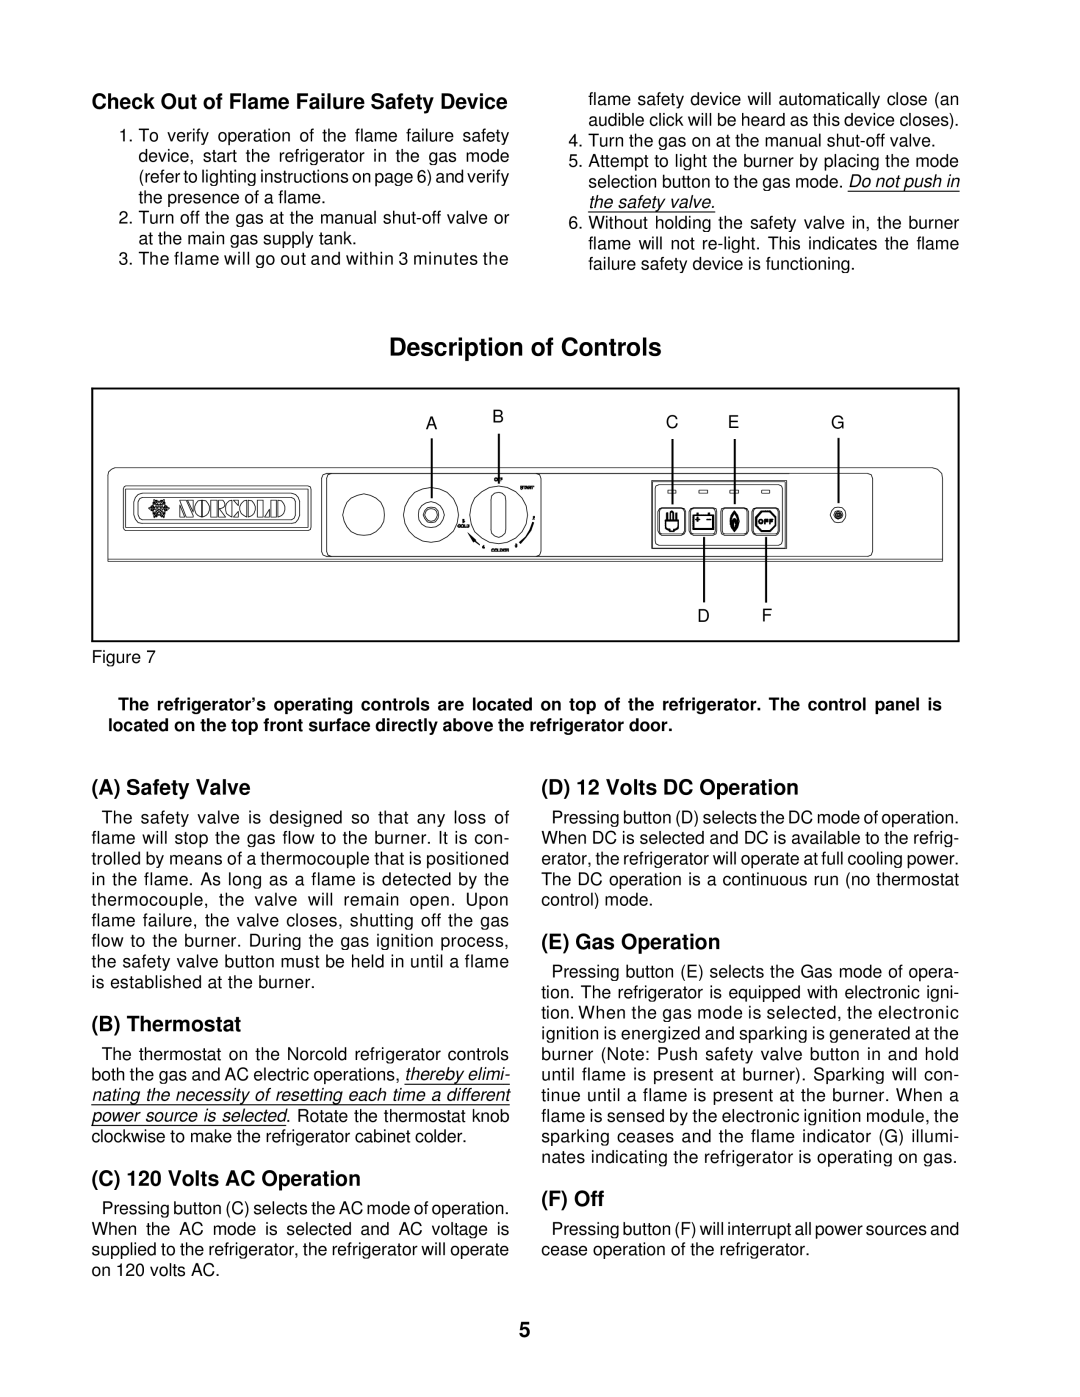 Bryant 3163 Description of Controls, Check Out of Flame Failure Safety Device, A Safety Valve, B Thermostat, F Off 